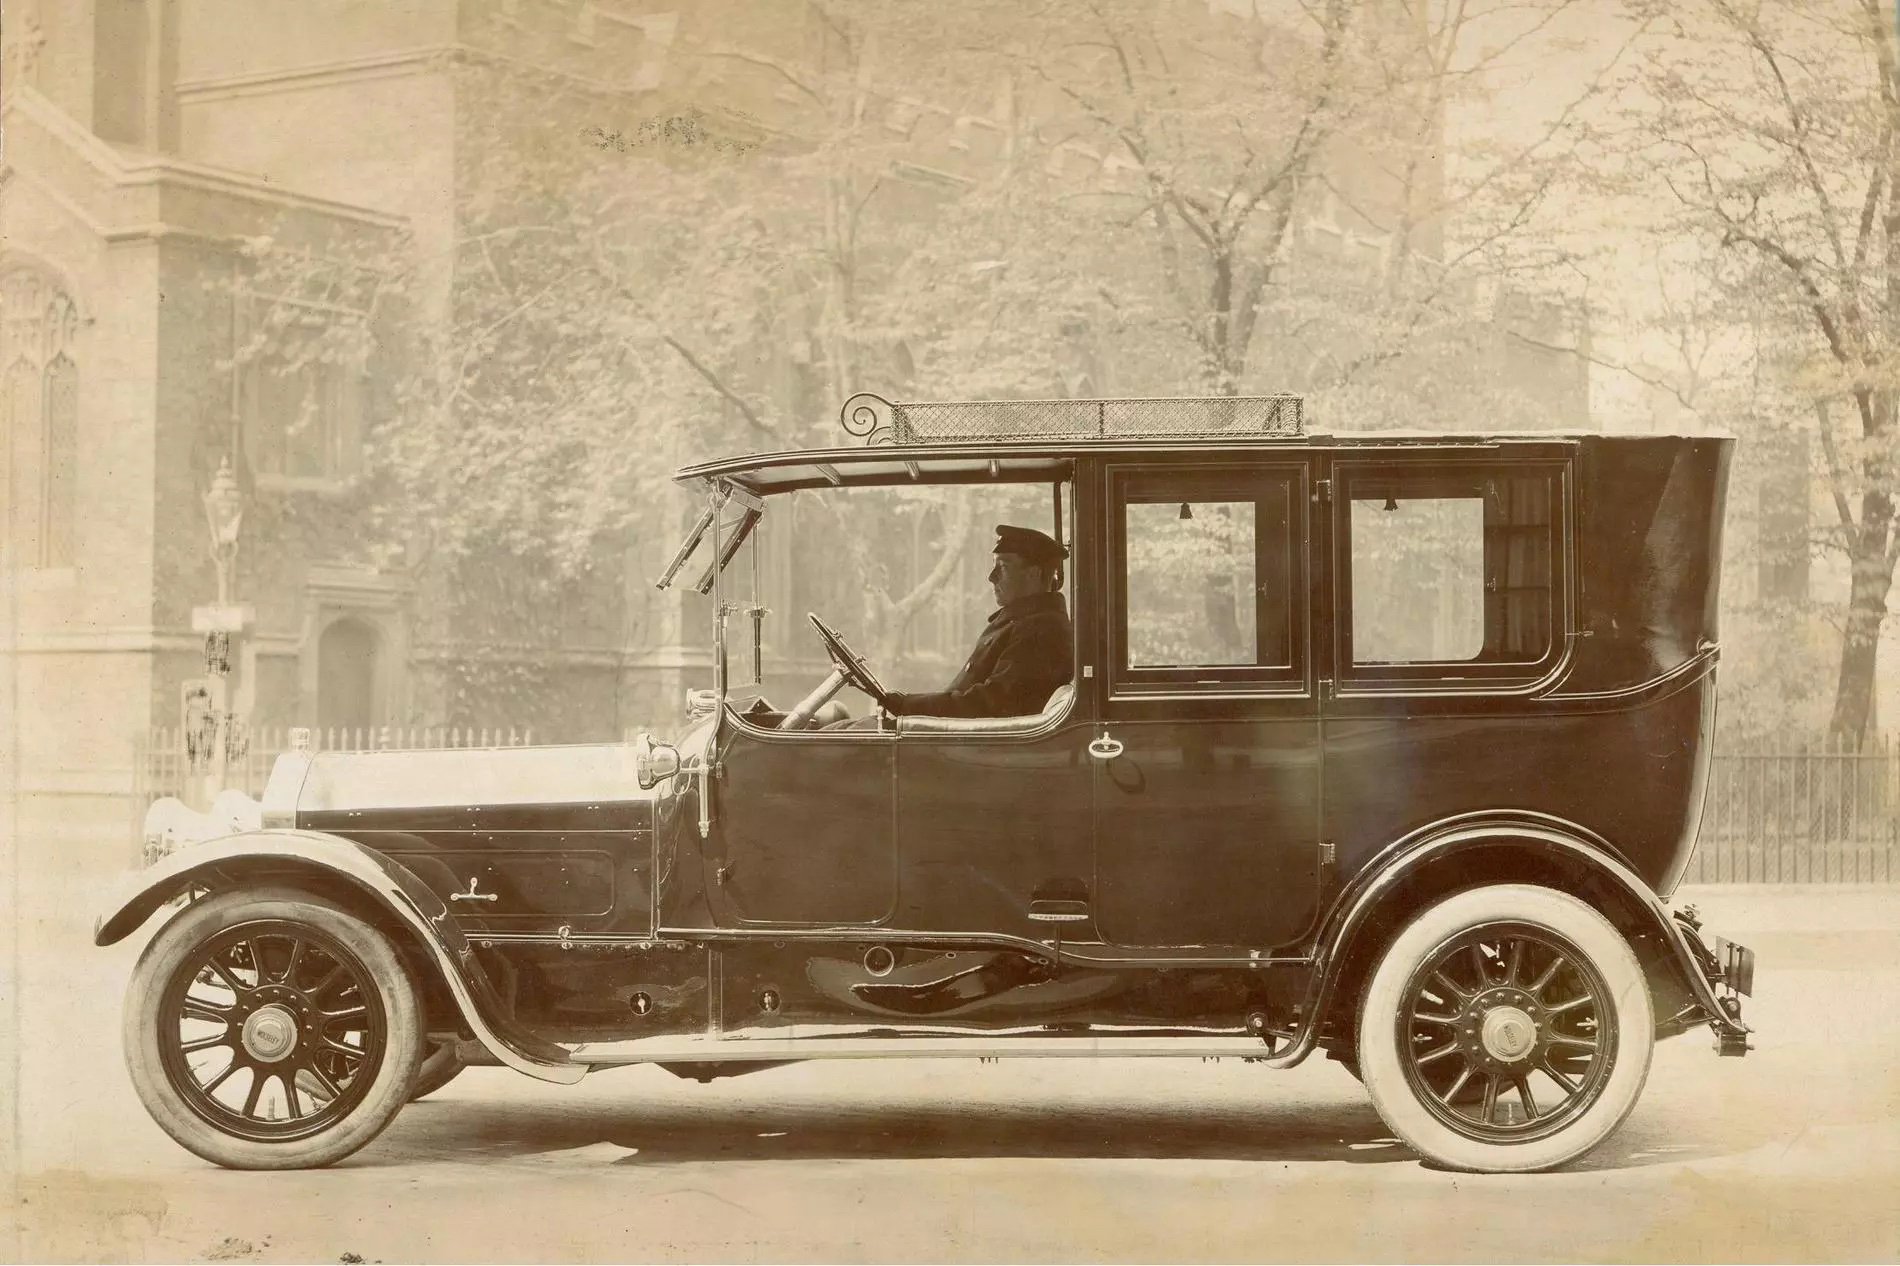 A historical hearse from JH Kenyon funeral directors